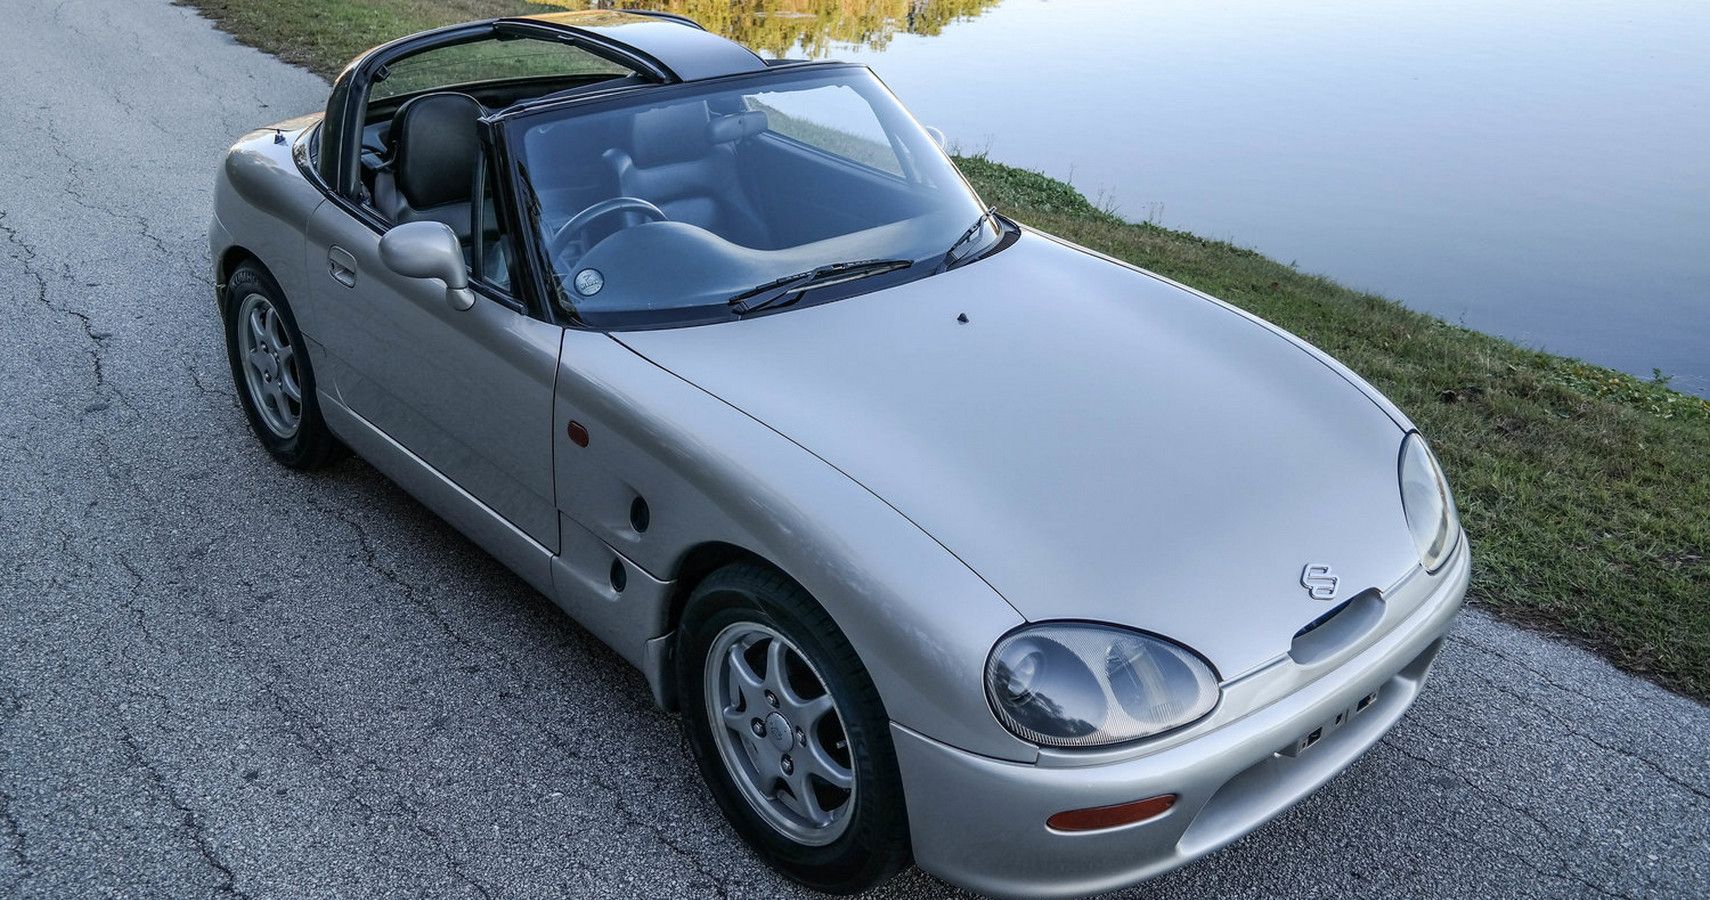 Suzuki Cappuccino: Costs, Facts, And Figures